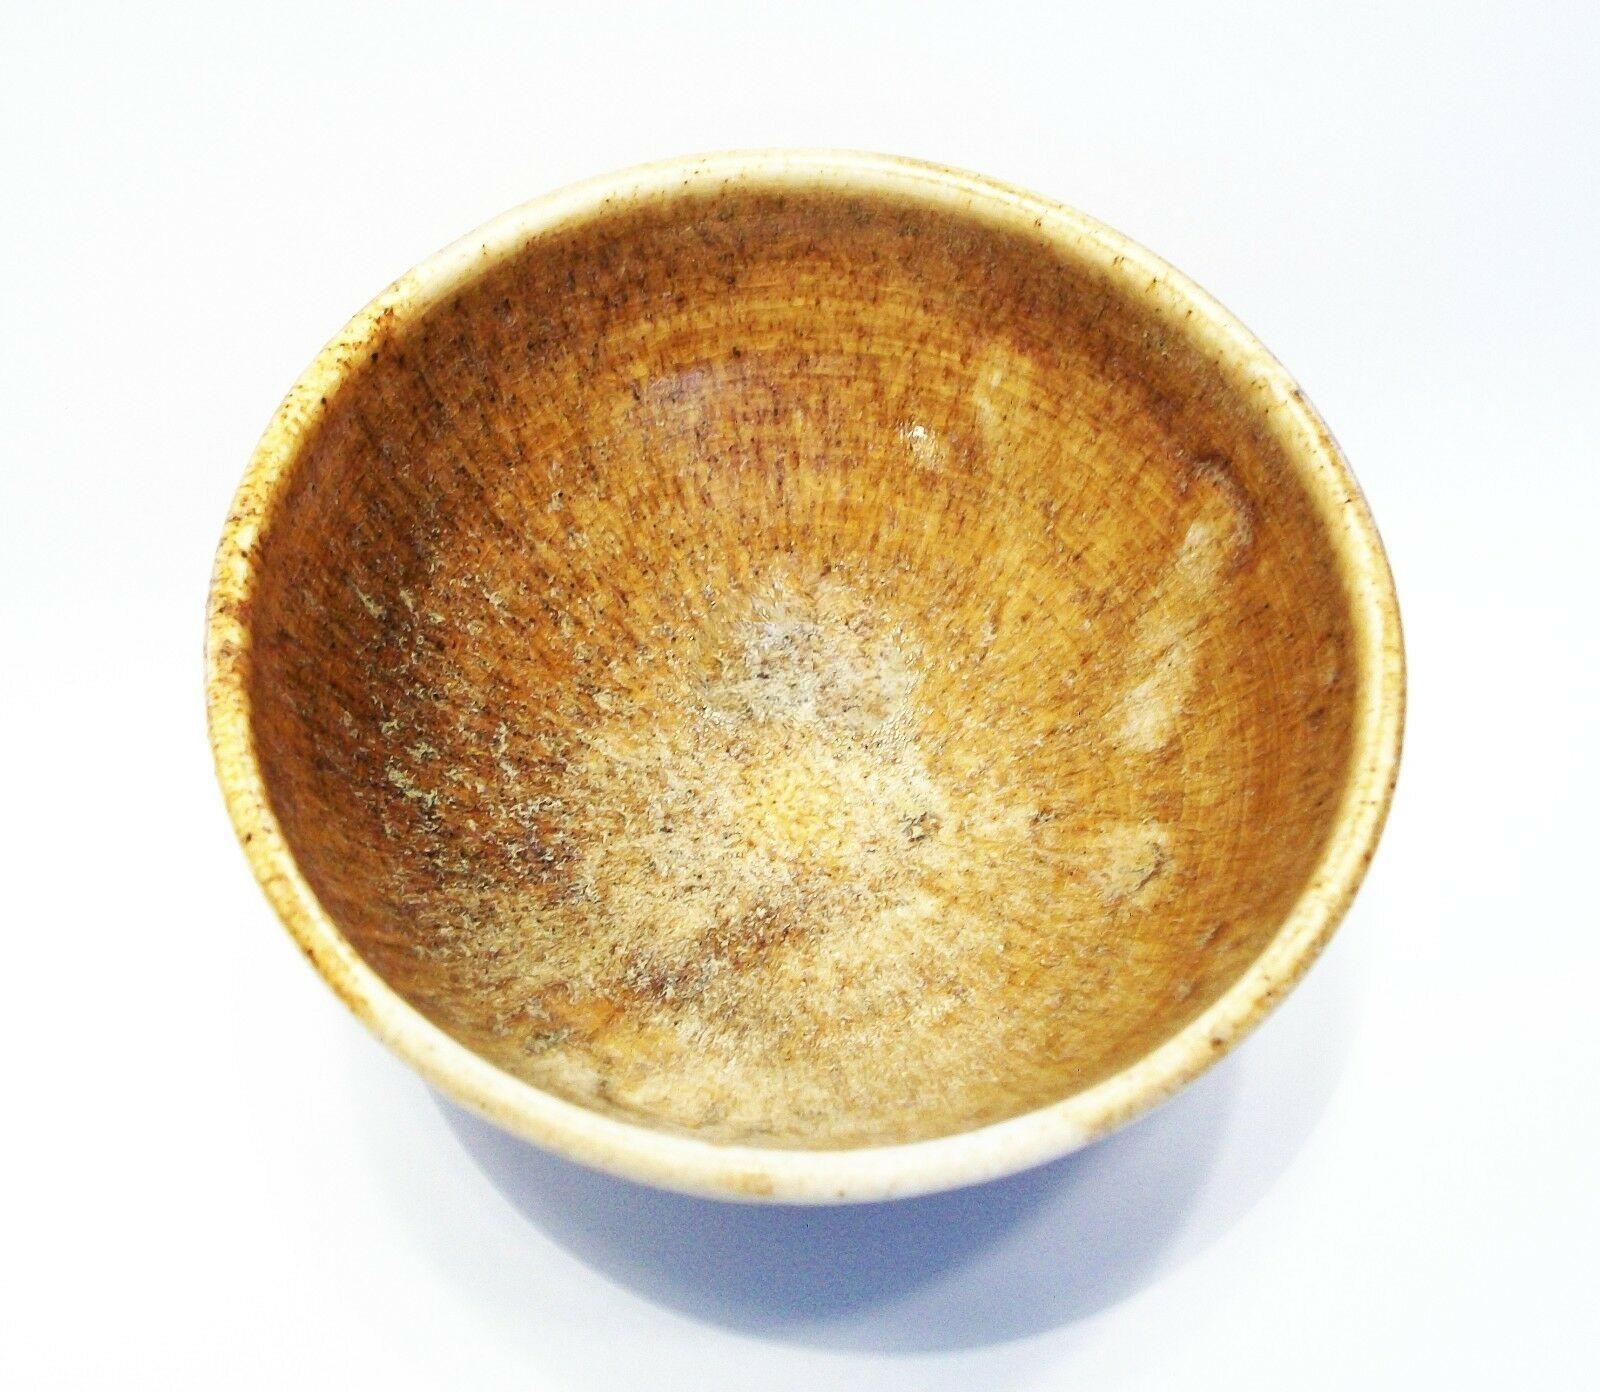 Vintage Asian Hare's Fur Glaze Tea Bowl - Unsigned - China - 20th Century For Sale 1